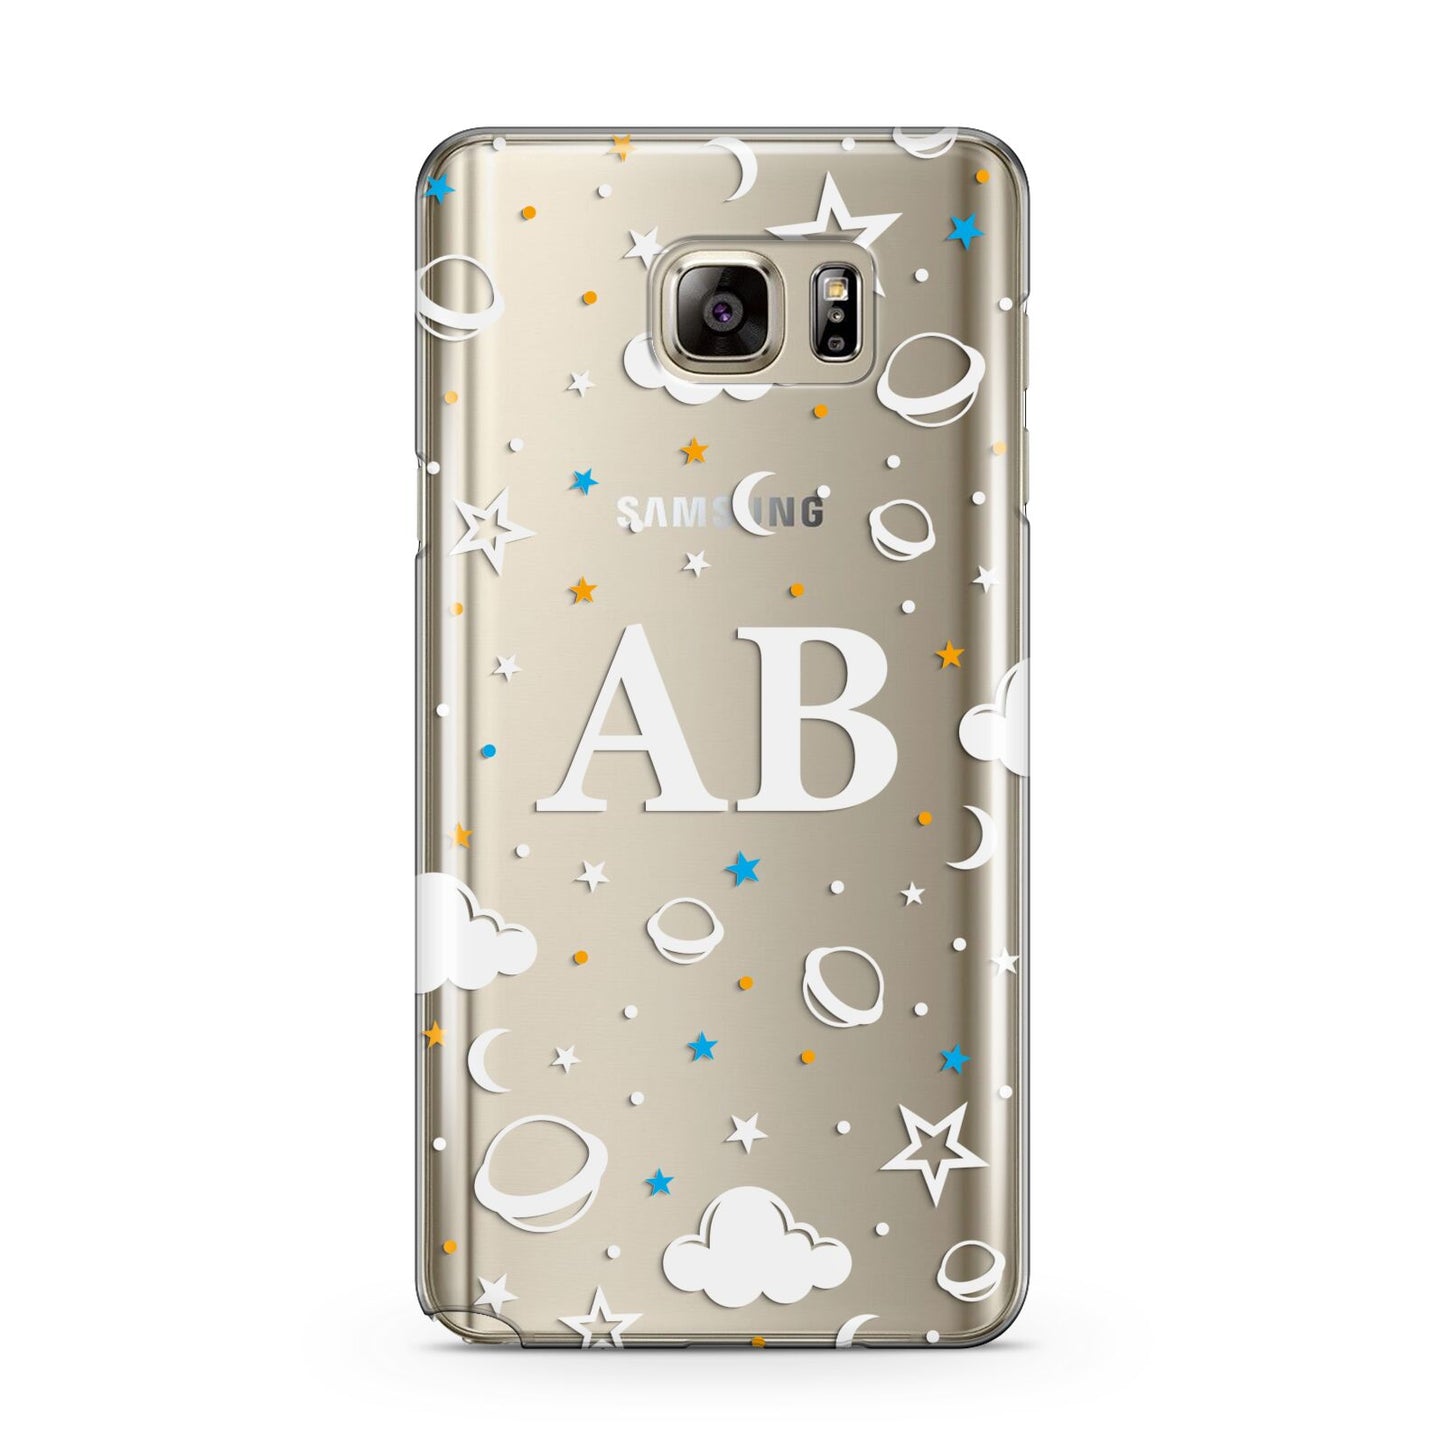 Astronomical Initials Samsung Galaxy Note 5 Case